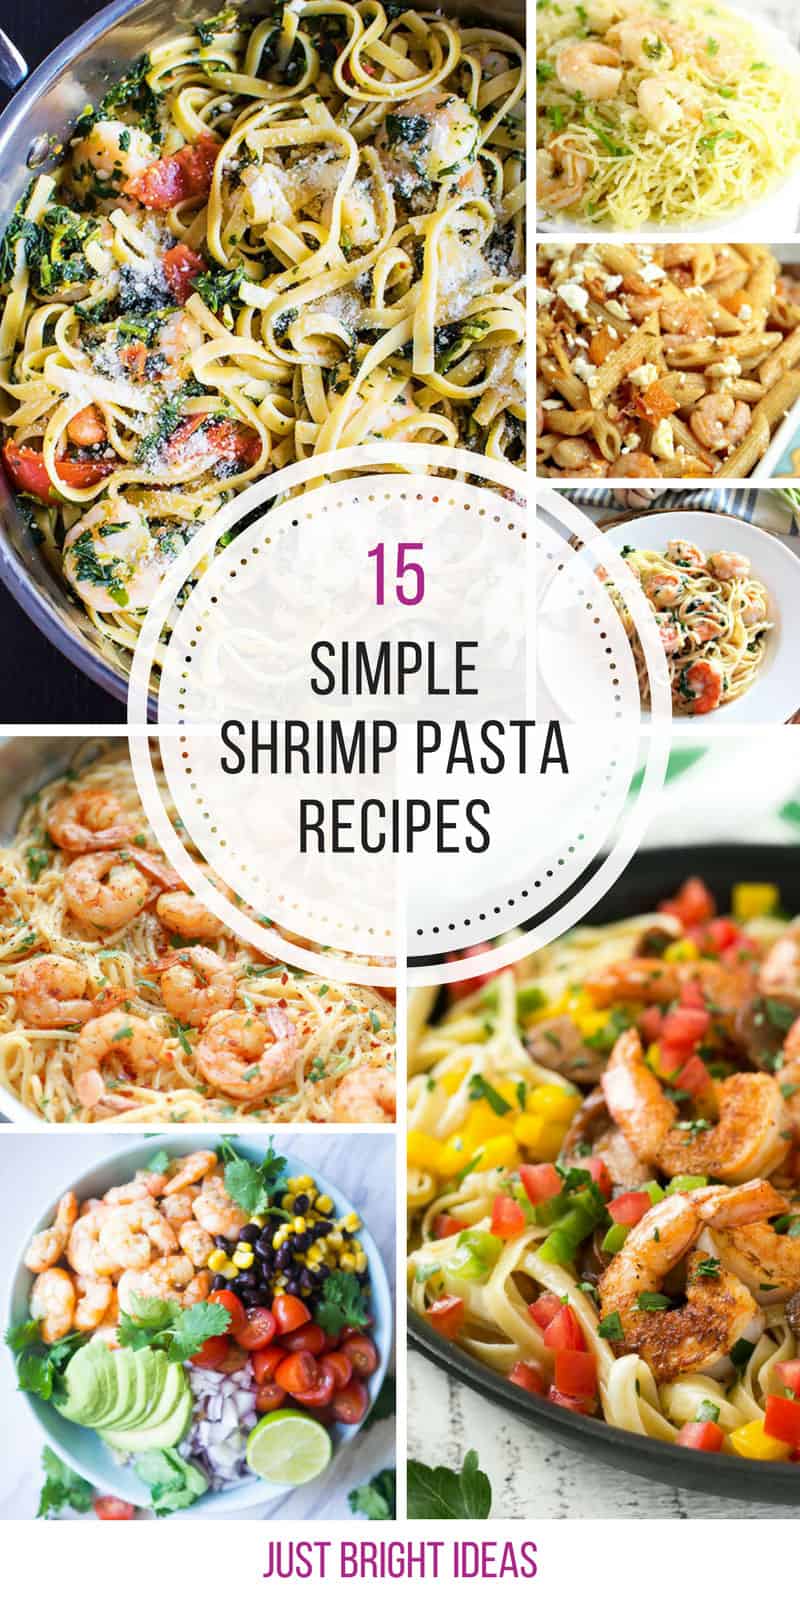 Loving these simple shrimp pasta recipes! Thanks for sharing!